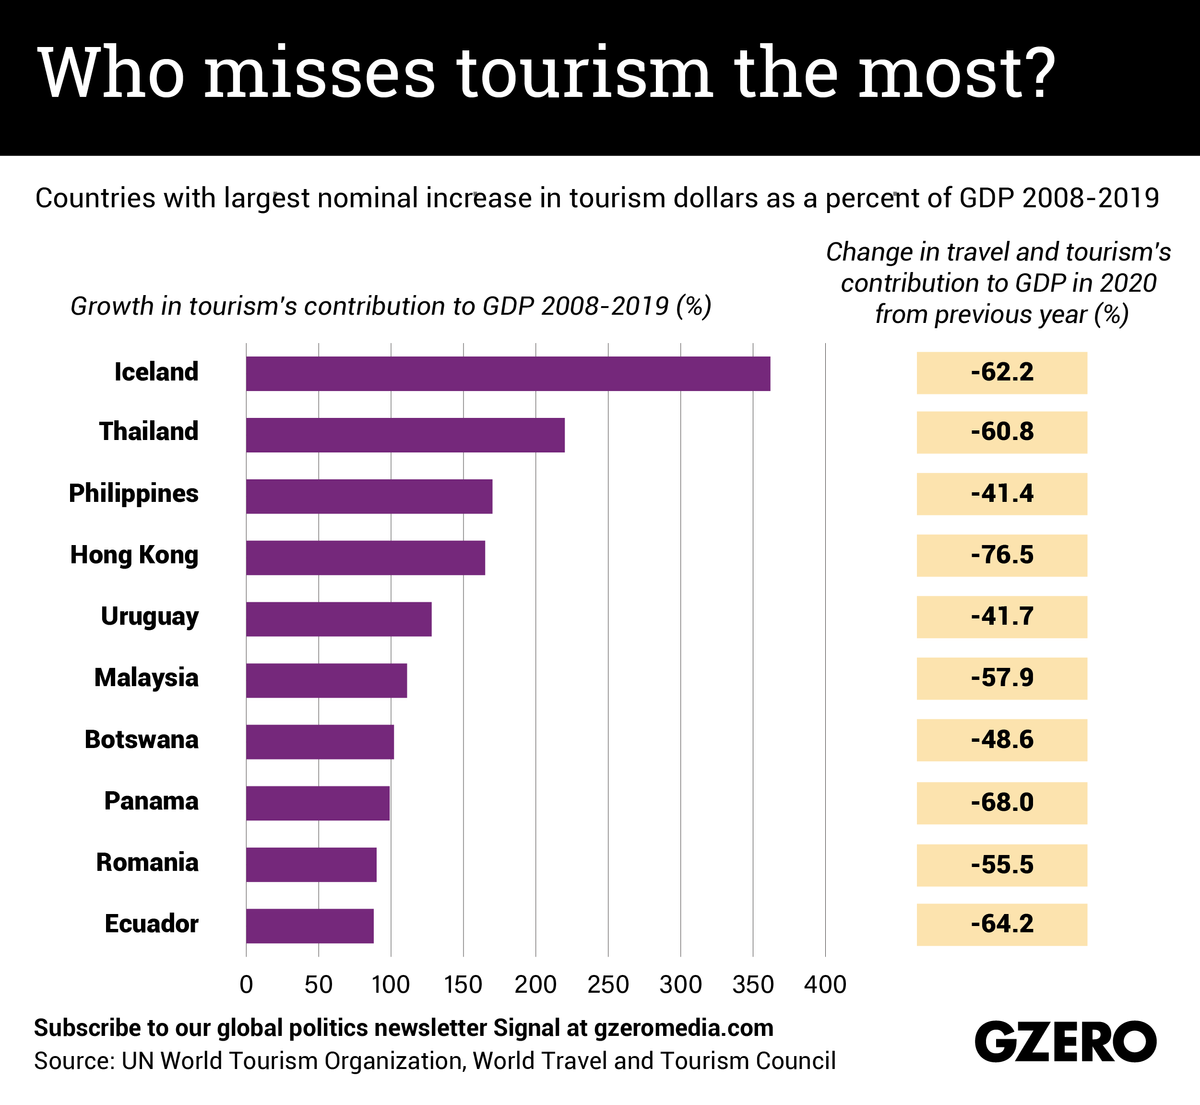 The Graphic Truth: Who misses tourism the most?